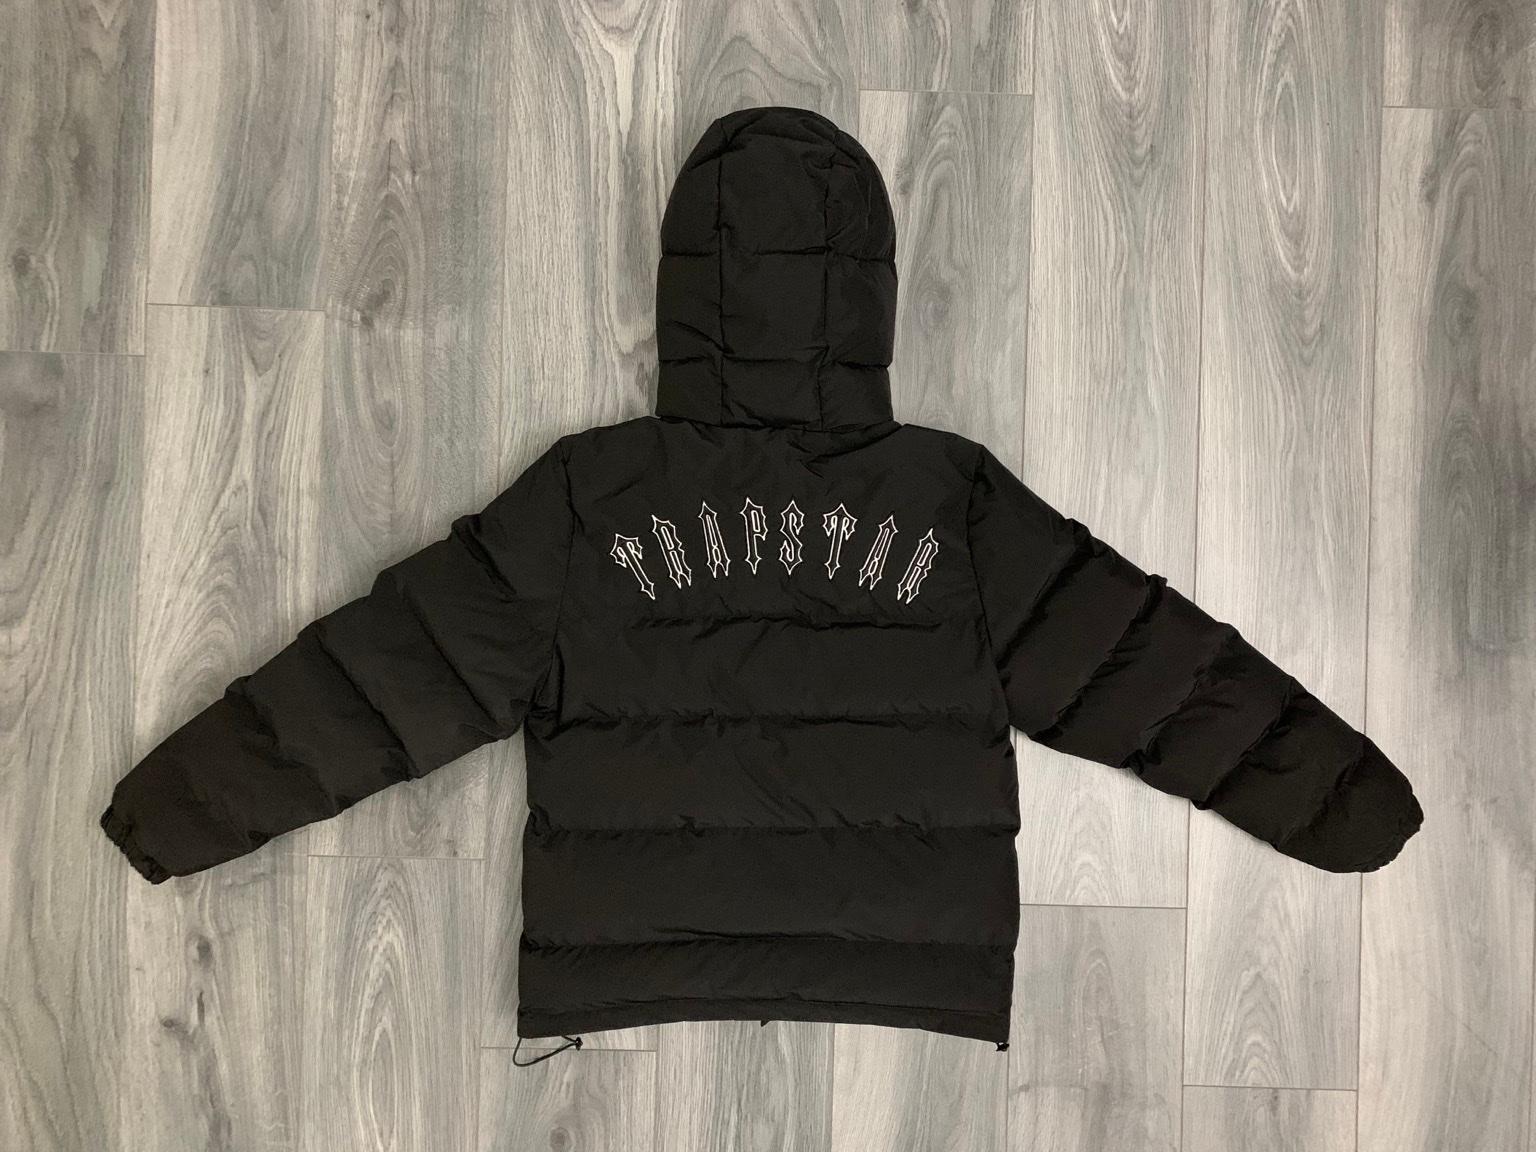 Trapstar Irongate Hooded Puffer Jacket in BD8 Bradford for £190.00 for ...